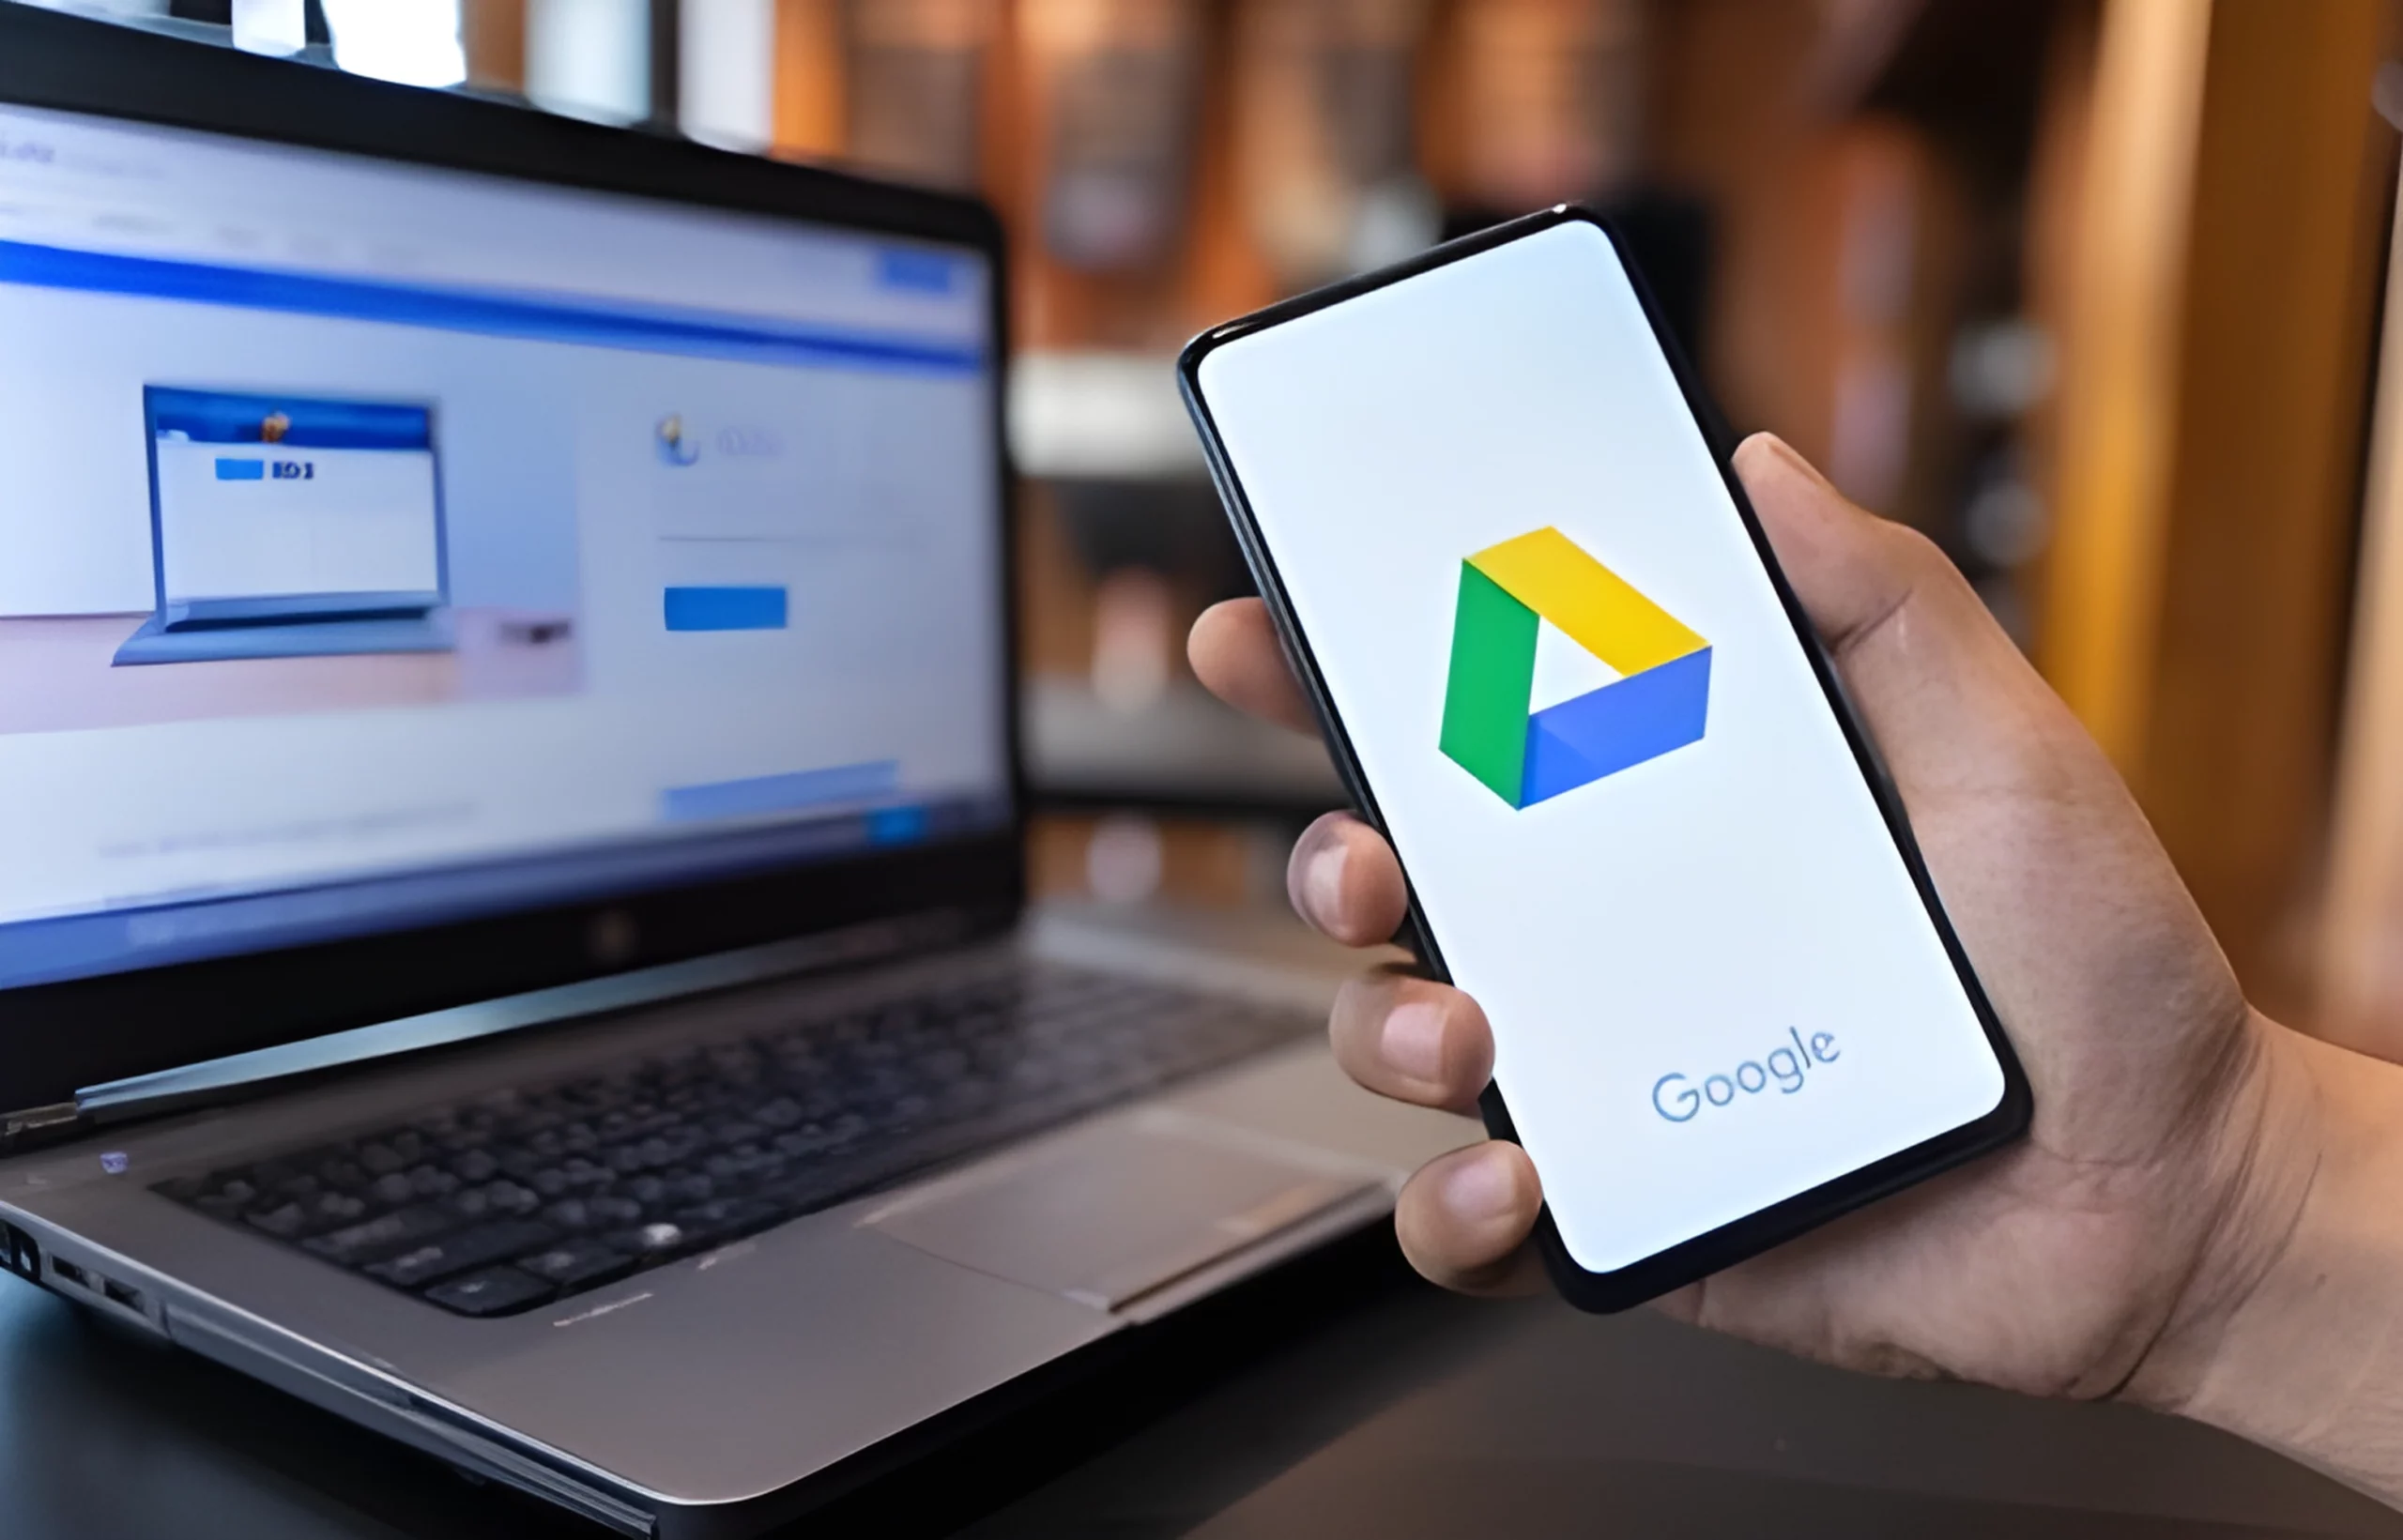 3 Effortless Tips To Help You Organize And Better Manage Your Google Drive featured image